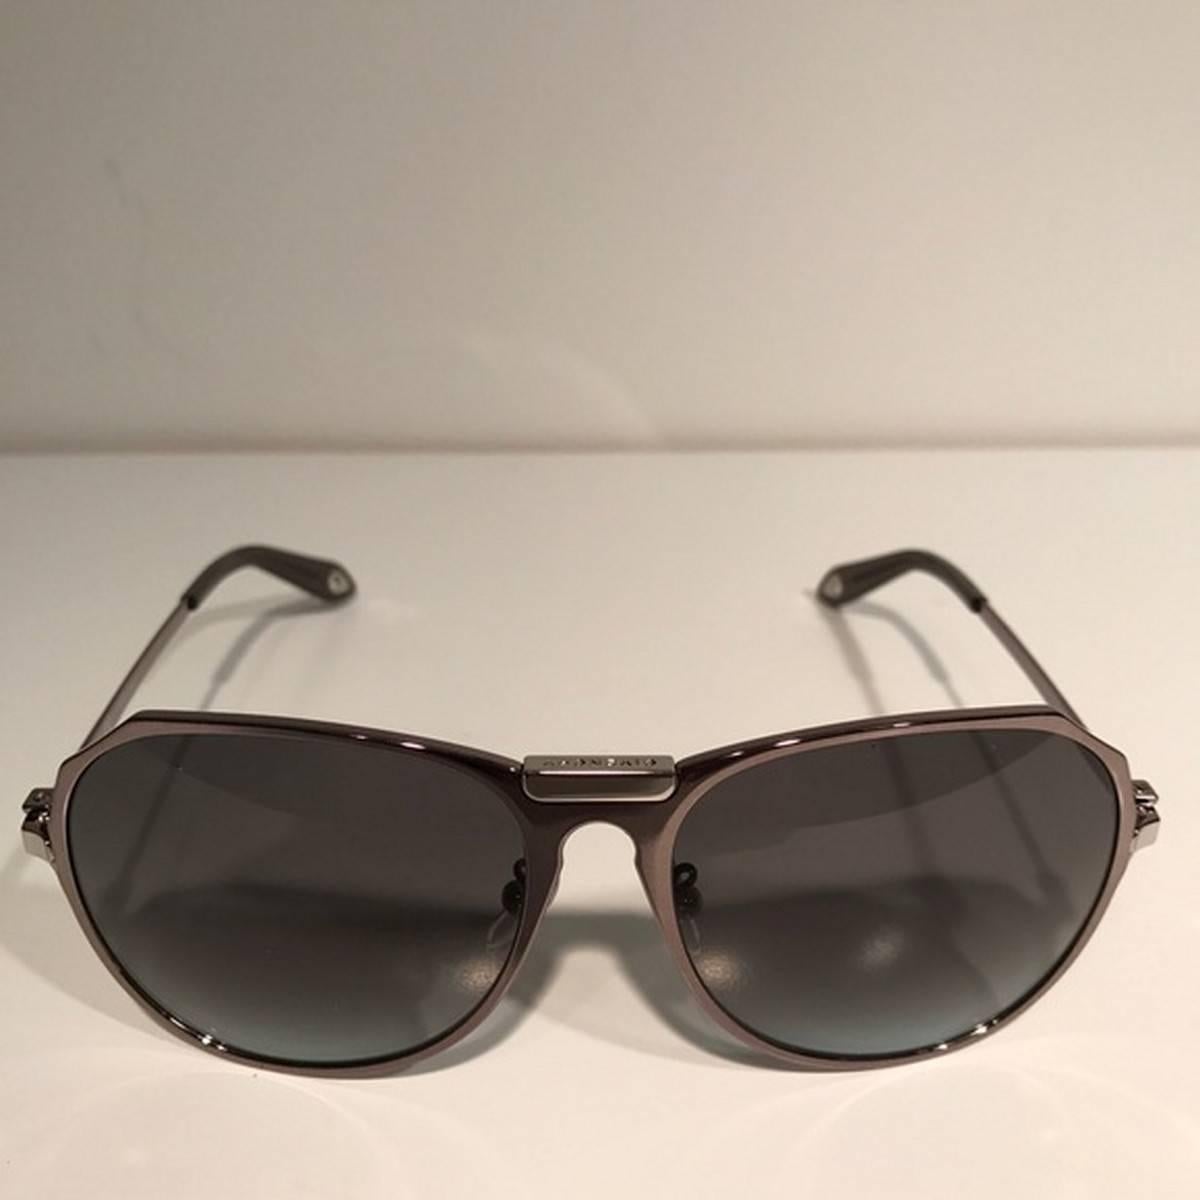 Givenchy Silver Aviator Sunglasses
Color: Gray/Silver
Size: OS

Brand new with box.
Unused condition.
No flaws.
Made in Italy.